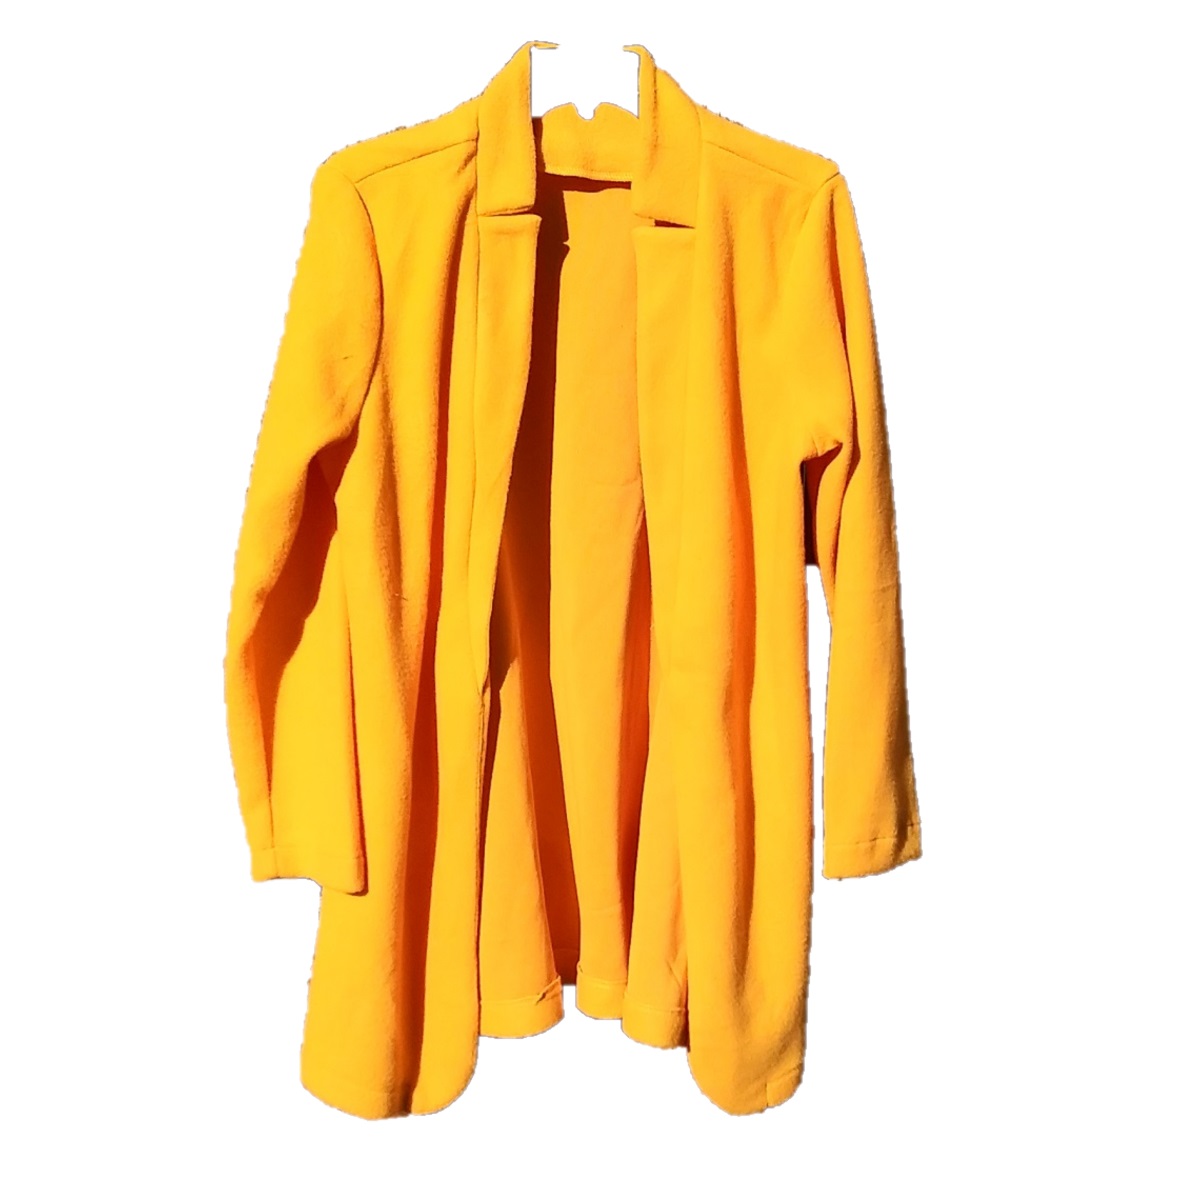 Women's Designer Coat Fashion Coat For an urban up and about town look. Mustard thigh length coat